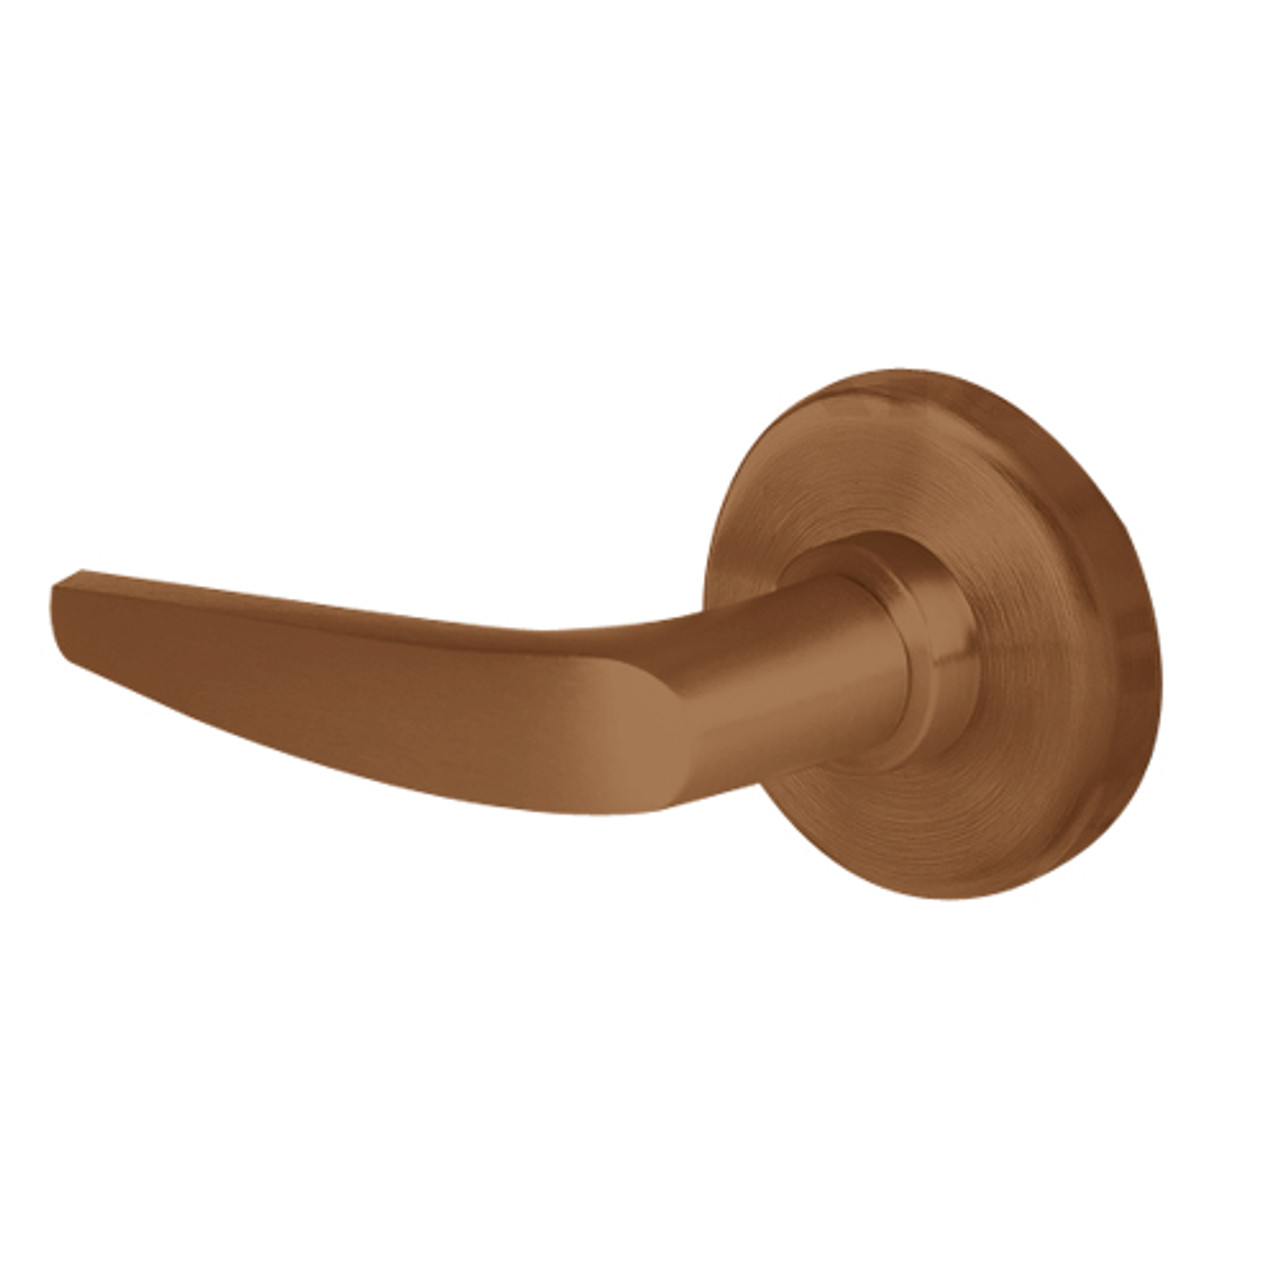 45H7G16R690 Best 40H Series Communicating with Deadbolt Heavy Duty Mortise Lever Lock with Curved with No Return in Dark Bronze